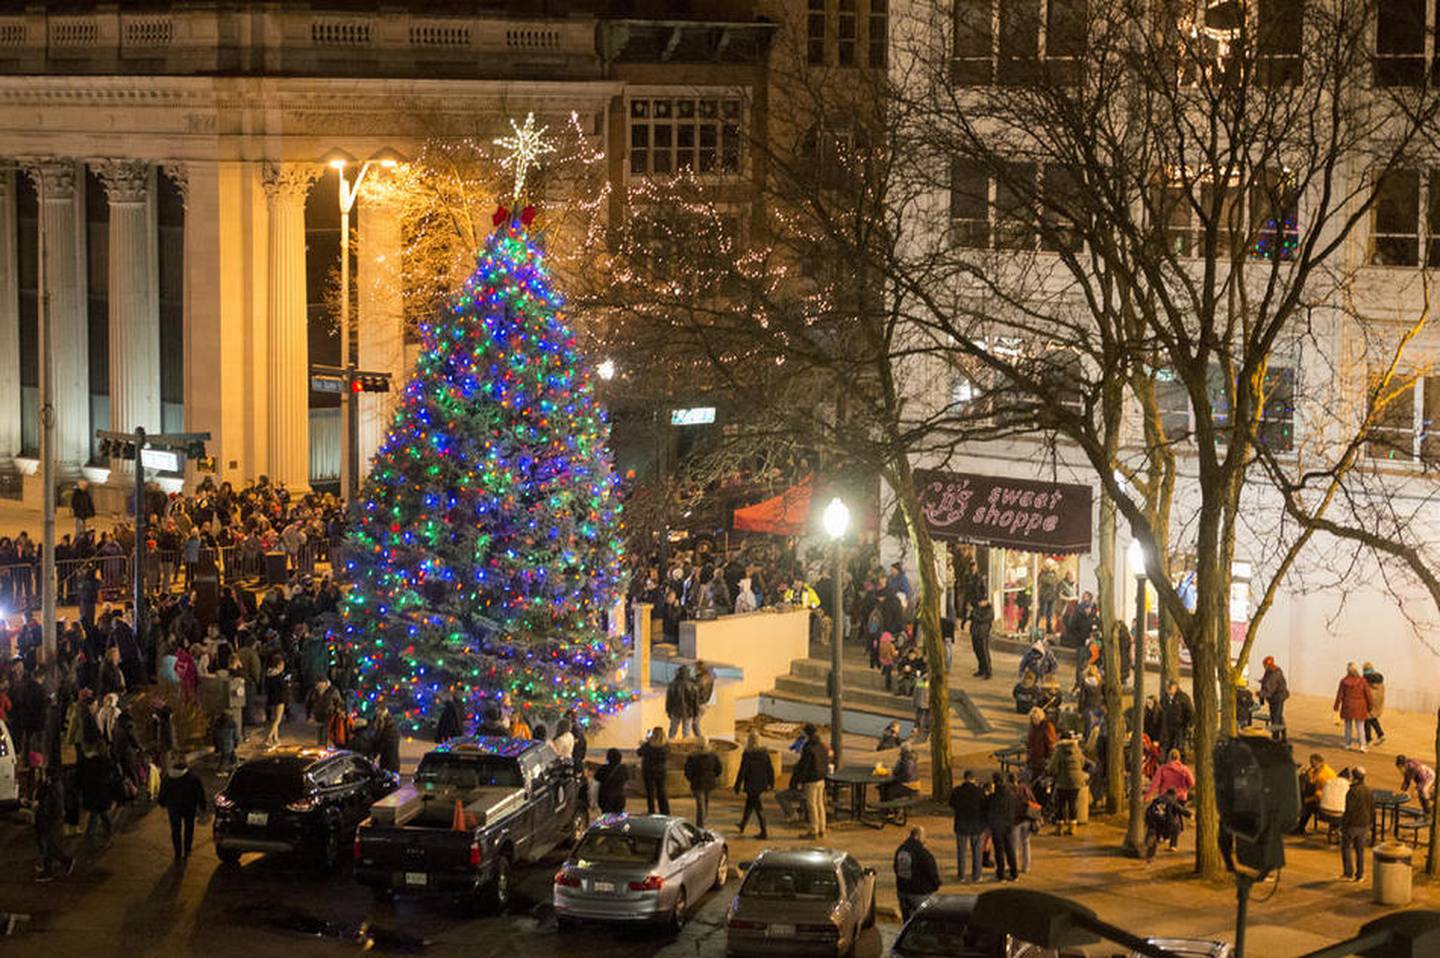 The city Christmas tree is lit during the Light Up the Holidays festivities Friday in Joliet.